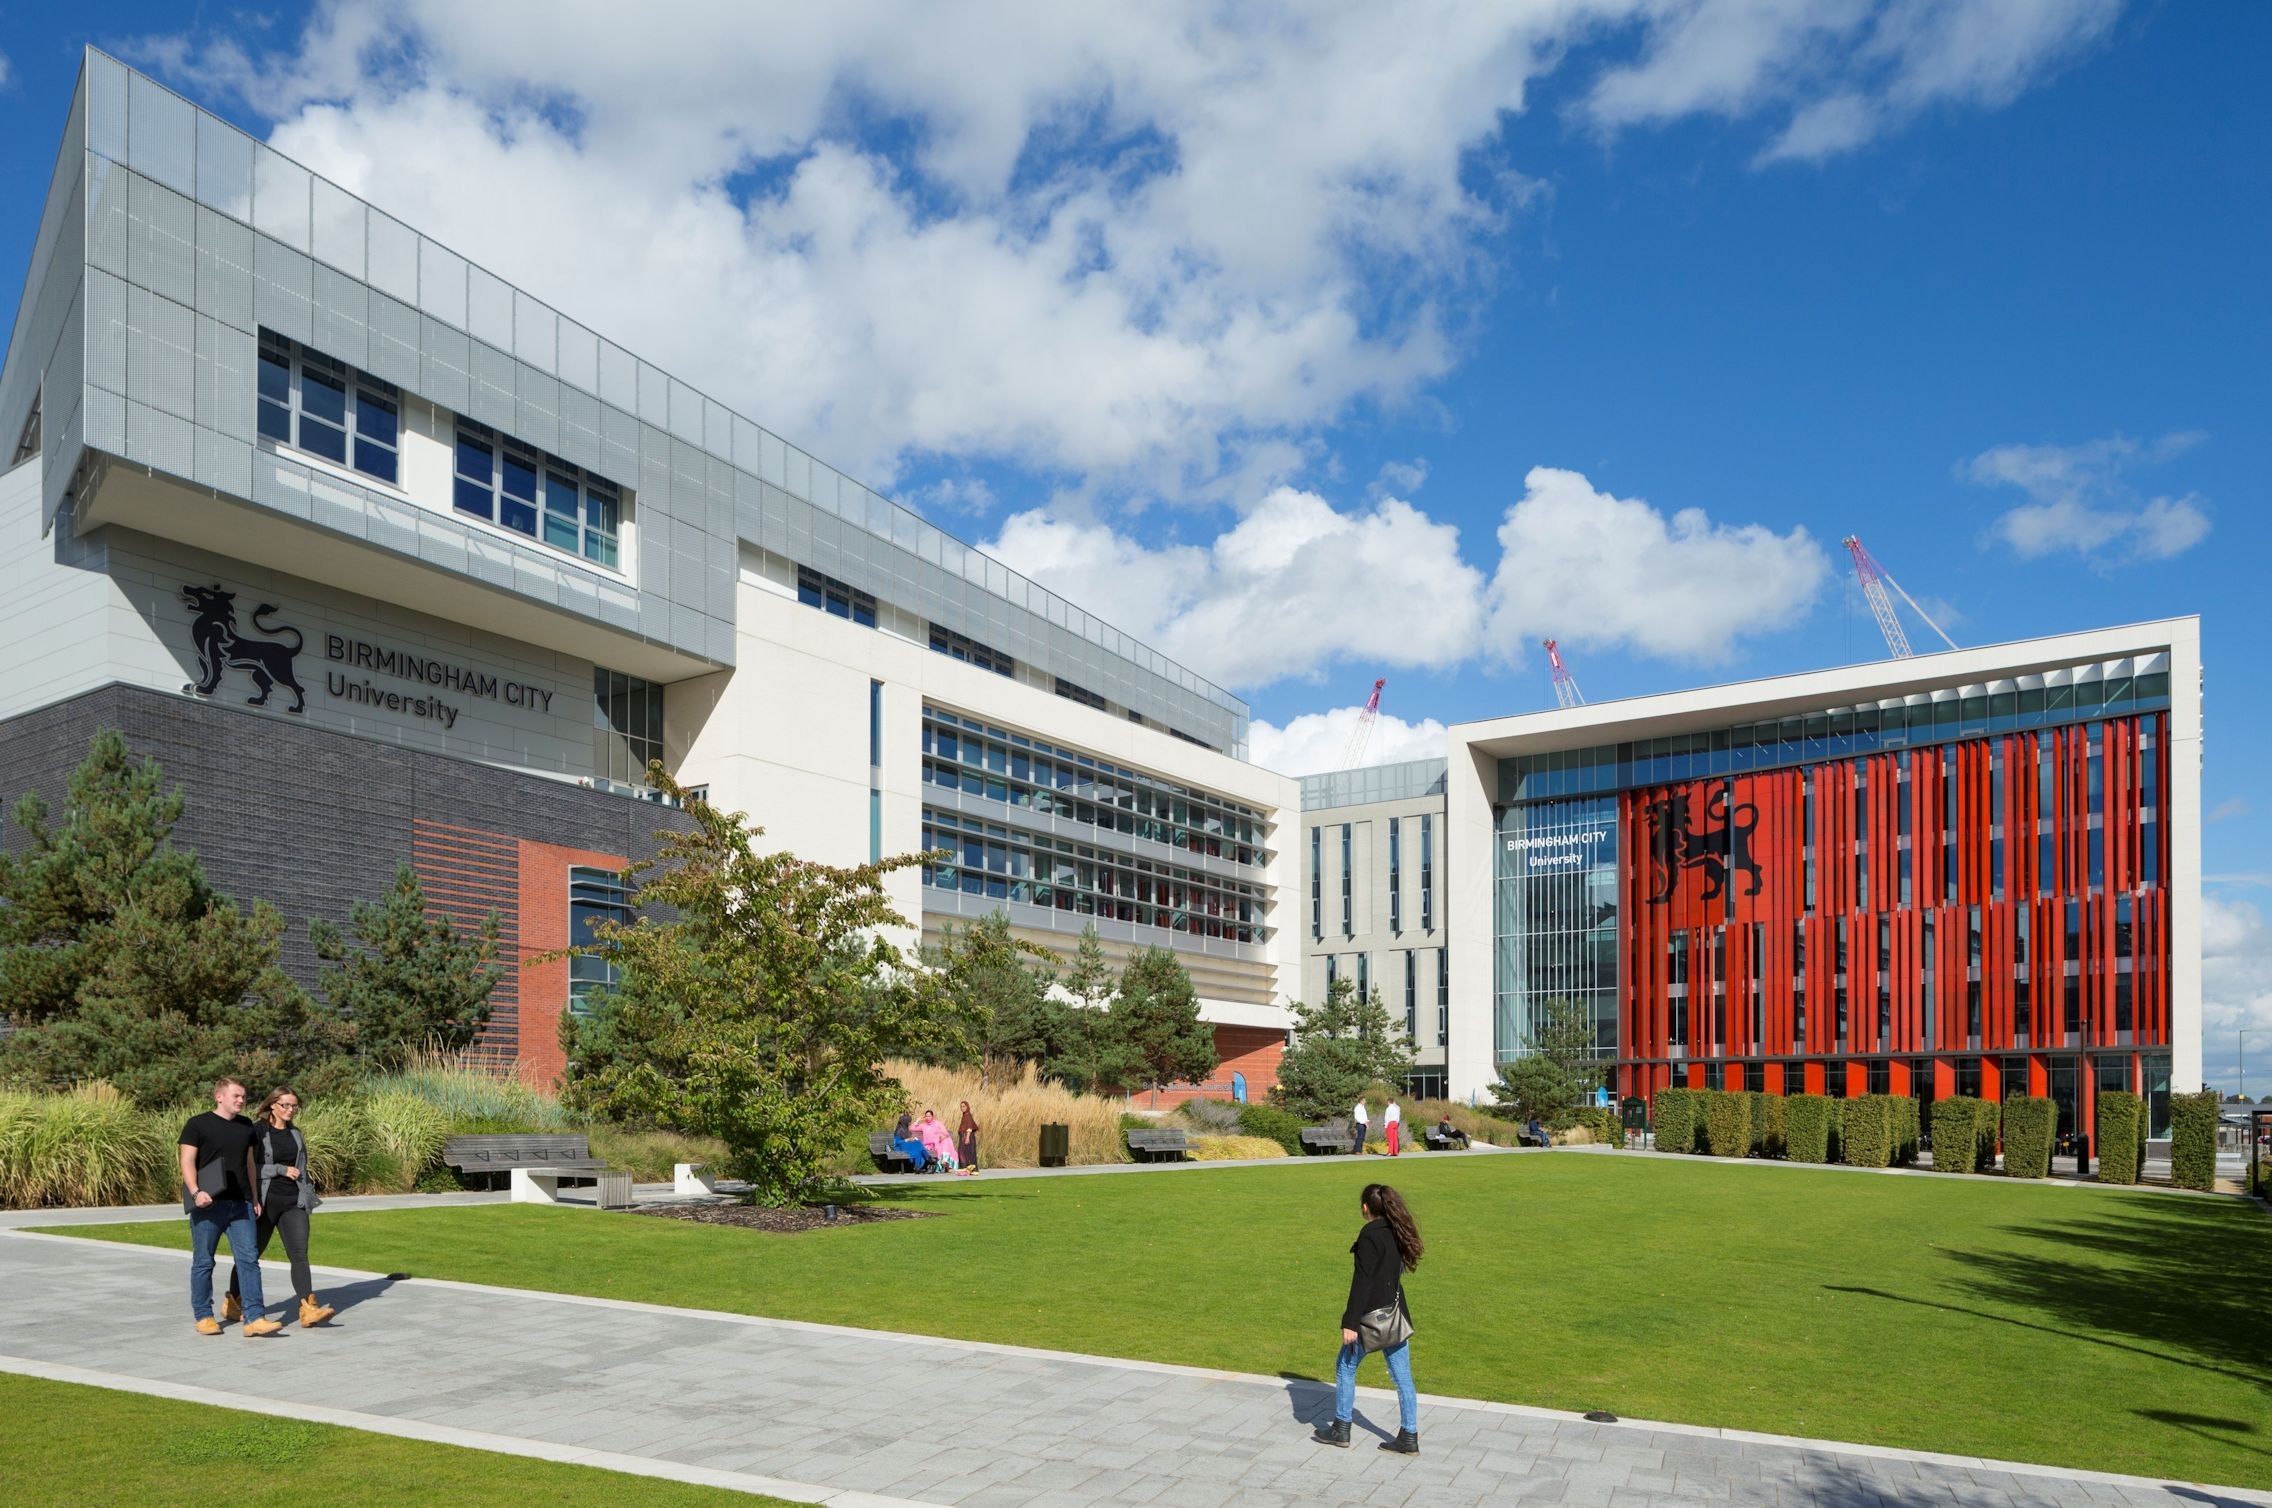 With over 24,000 students from 80 countries, Birmingham City University is a large, diverse and increasingly popular place to study